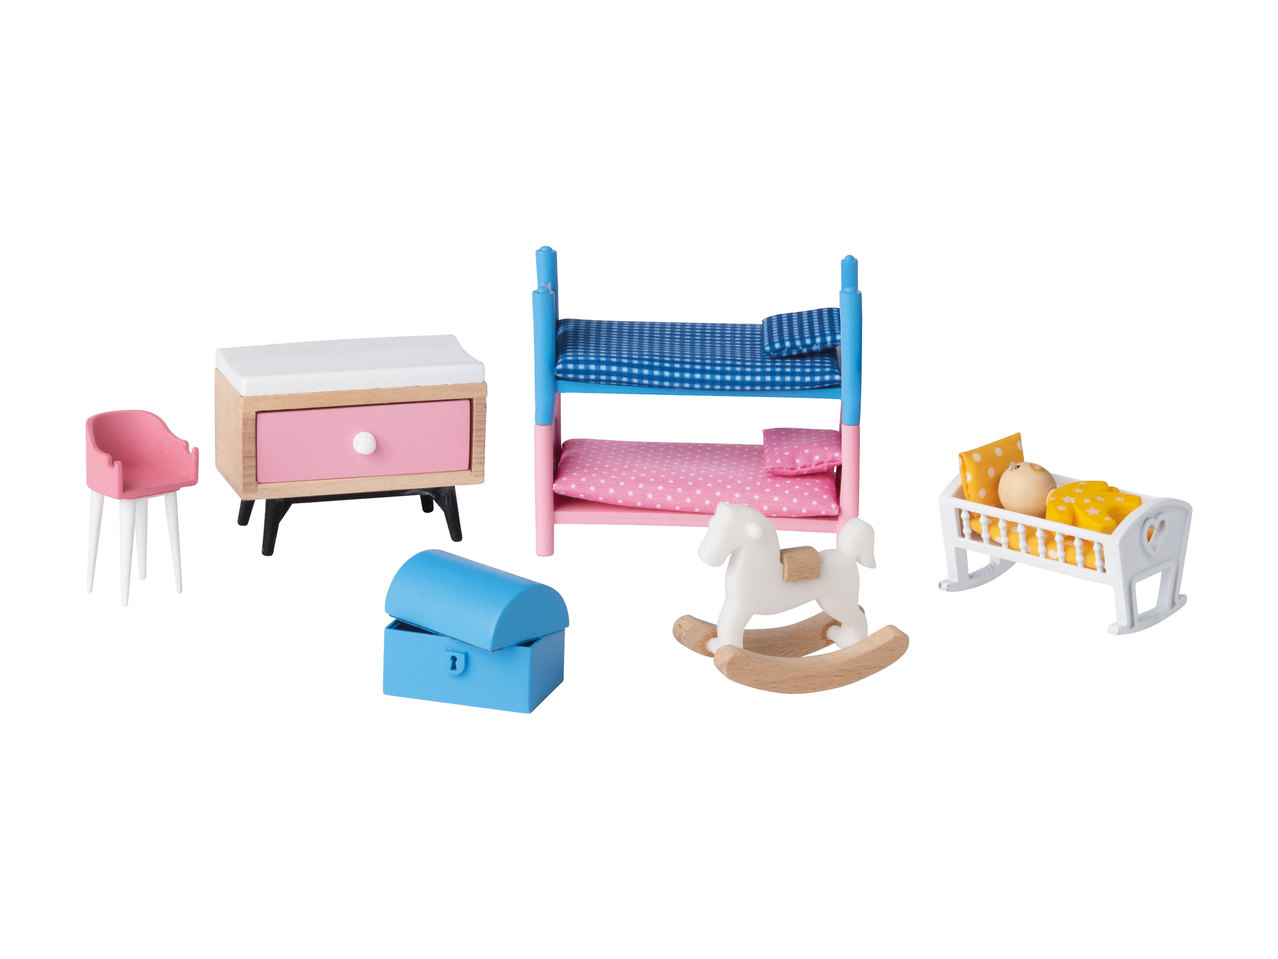 Playtive Junior Flexible Doll Family or Doll's House Furniture1